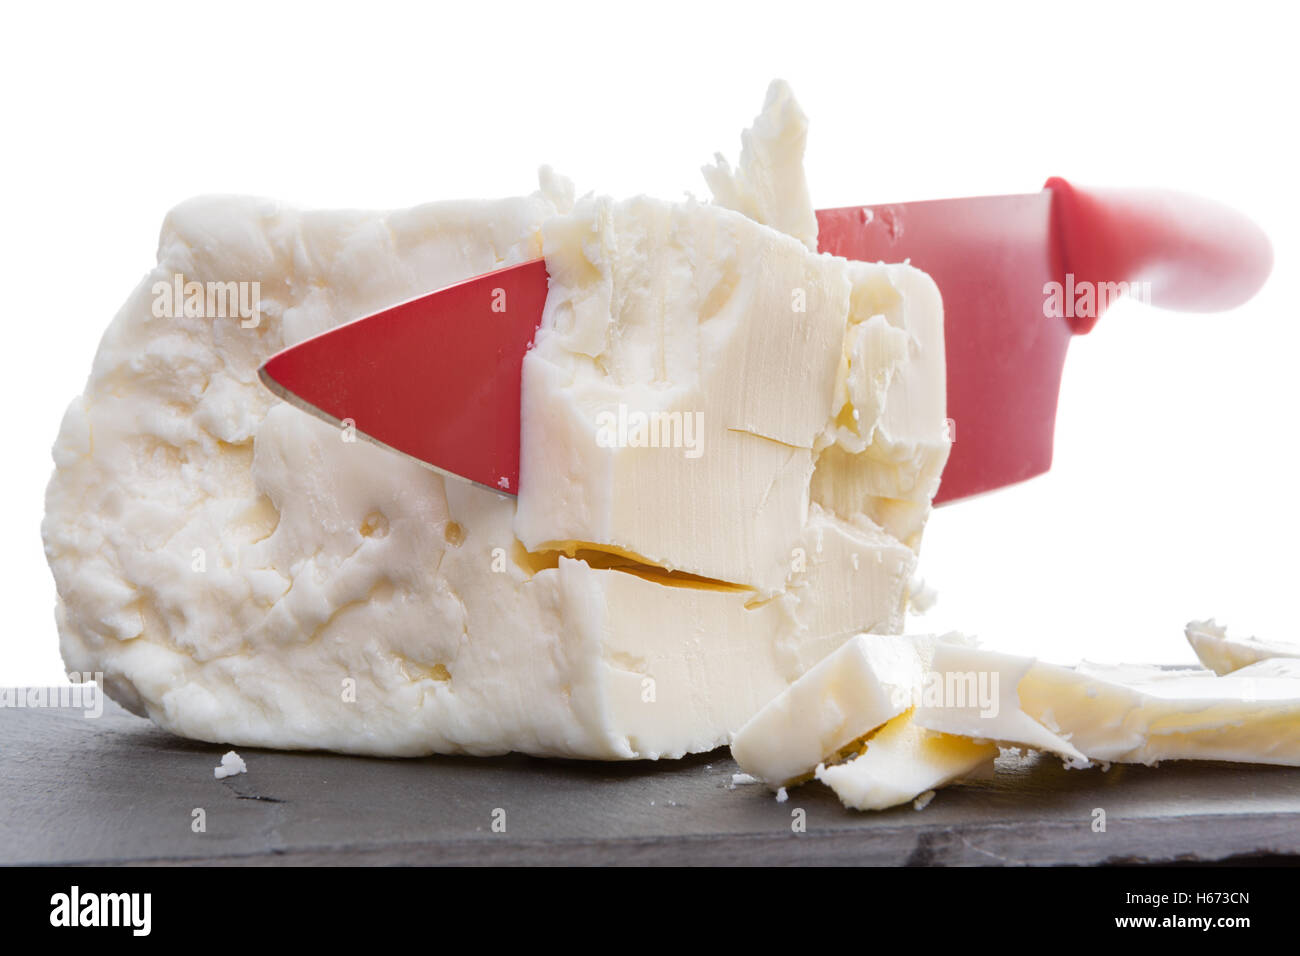 Red ceramic knife slicing through full cream feta cheese made with cow milk in a close up view of the crumbly creamy texture Stock Photo